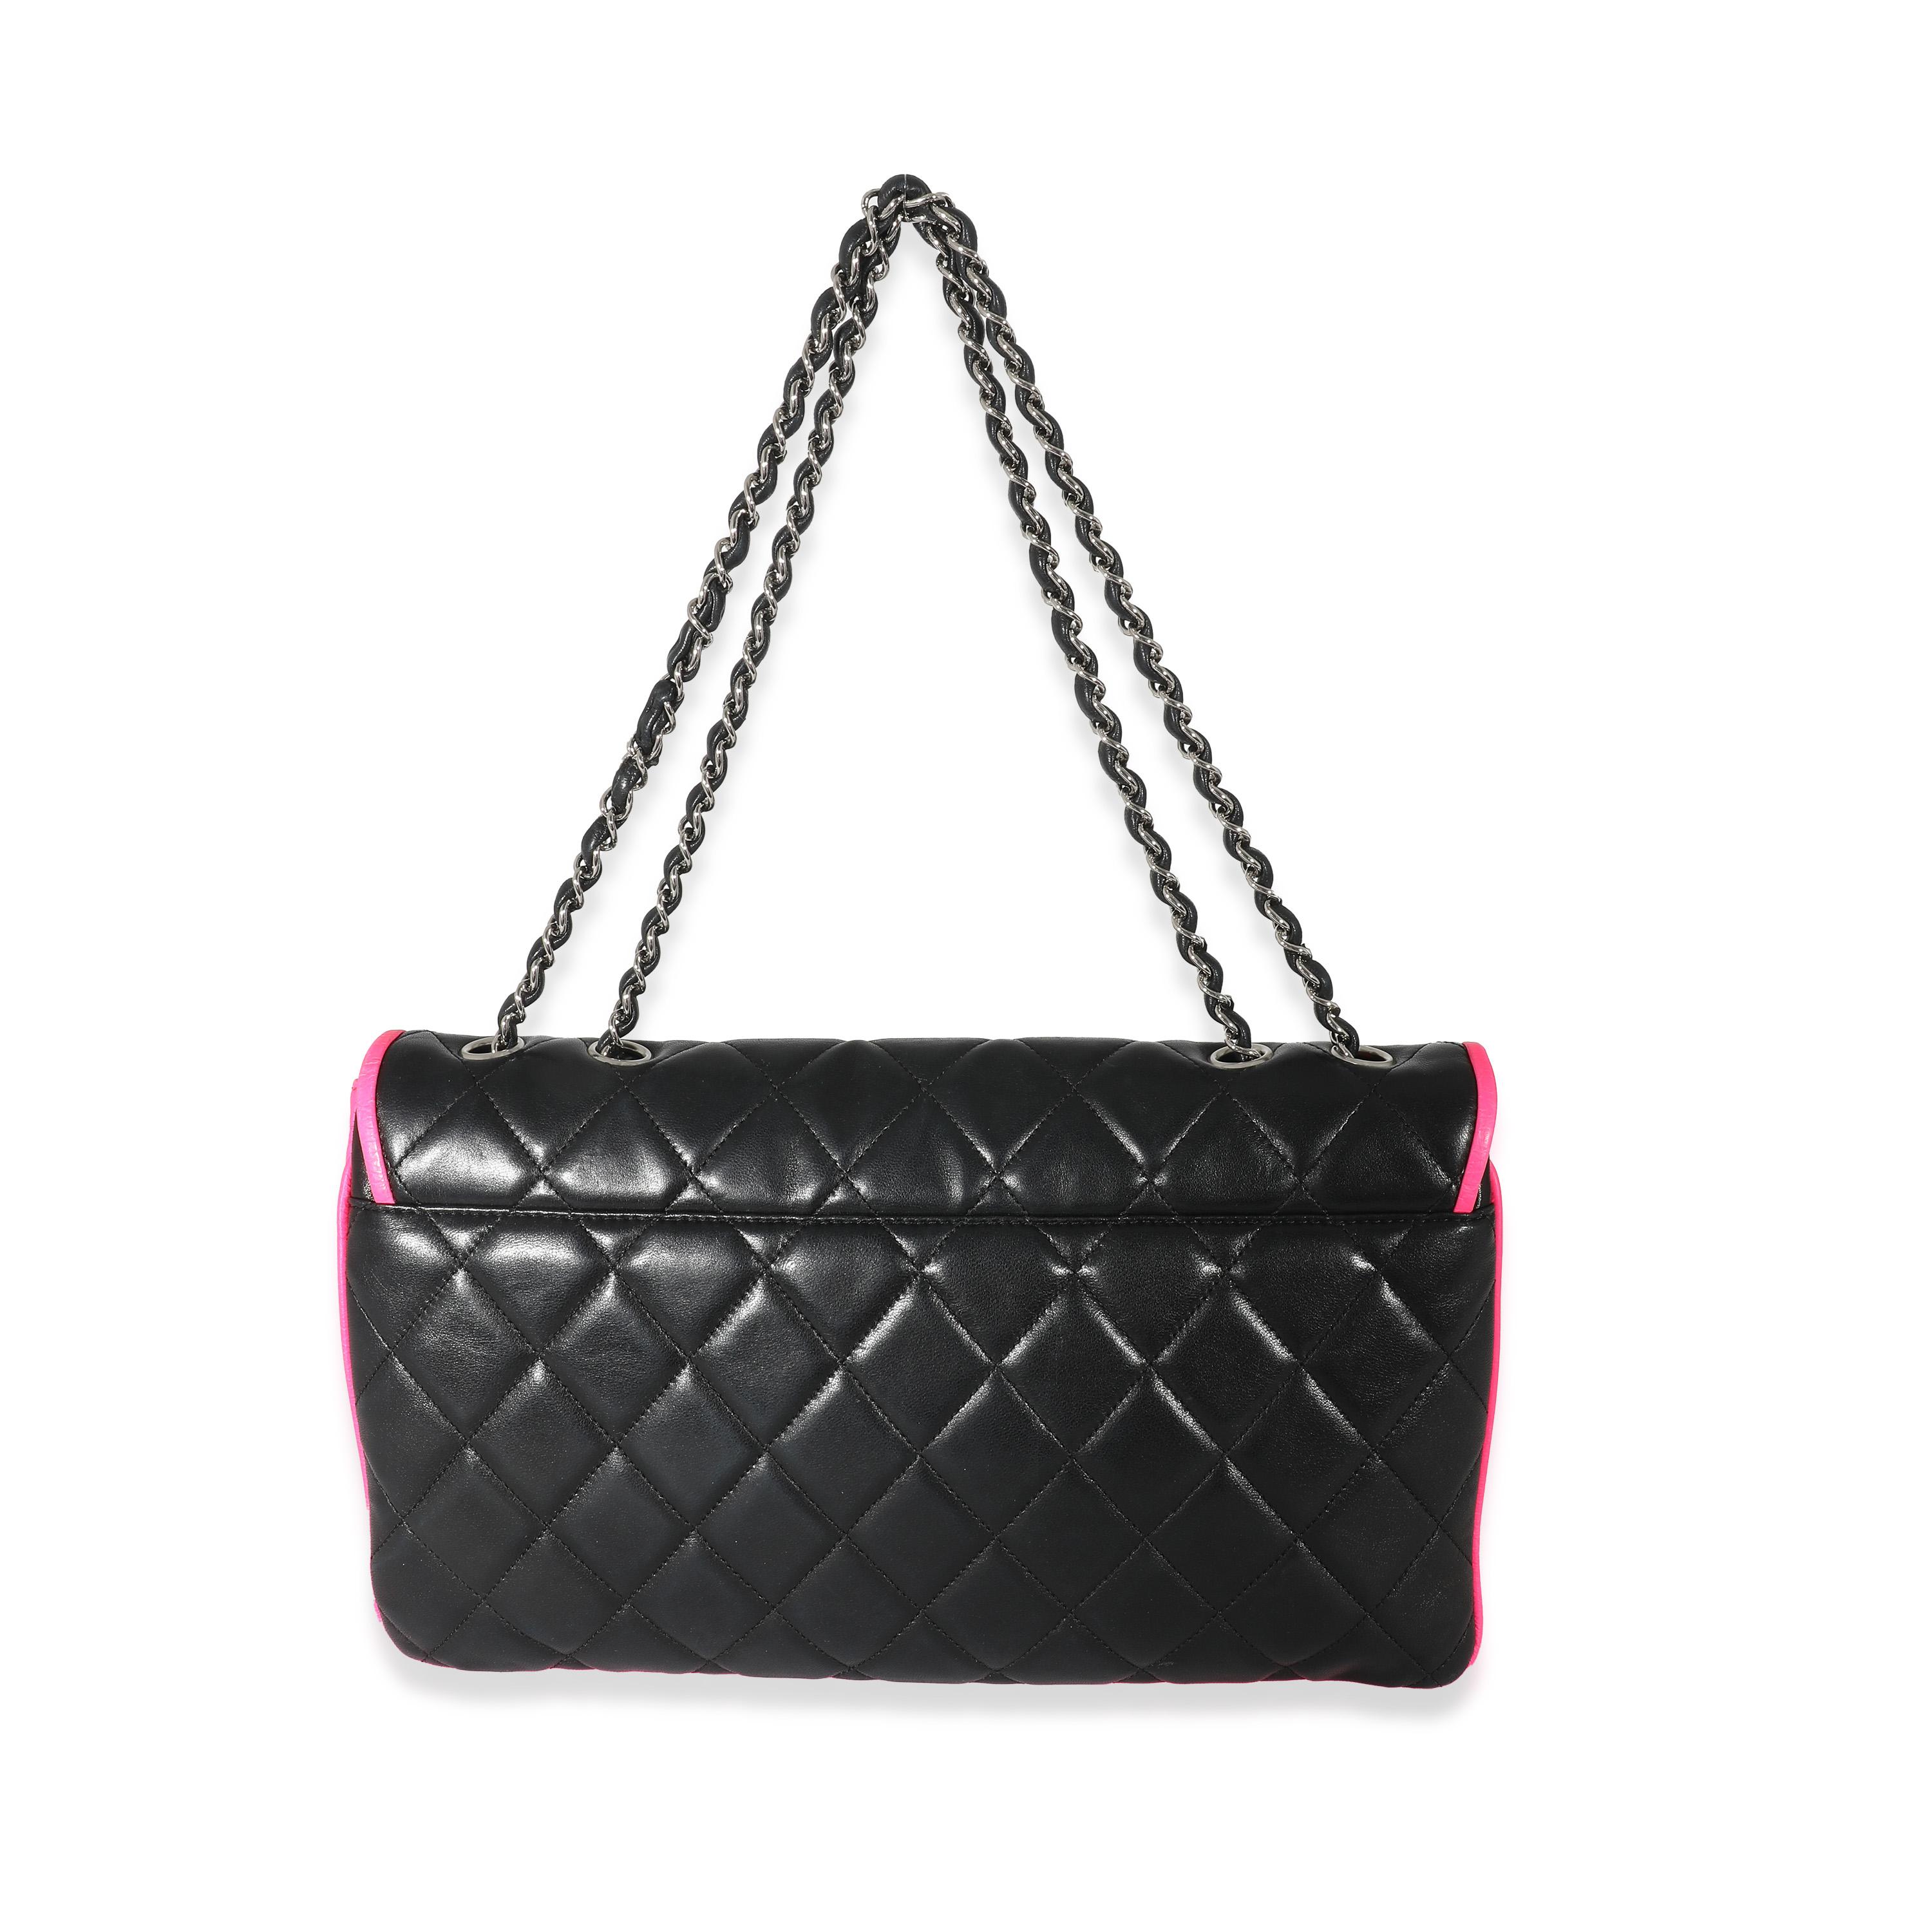 Listing Title: Chanel Black Pink Lambskin Enamel Large Maxi Divine Flap Bag
SKU: 133872
Condition: Pre-owned 
Handbag Condition: Very Good
Condition Comments: Item is in very good condition with minor signs of wear. Exterior heavy scuffing